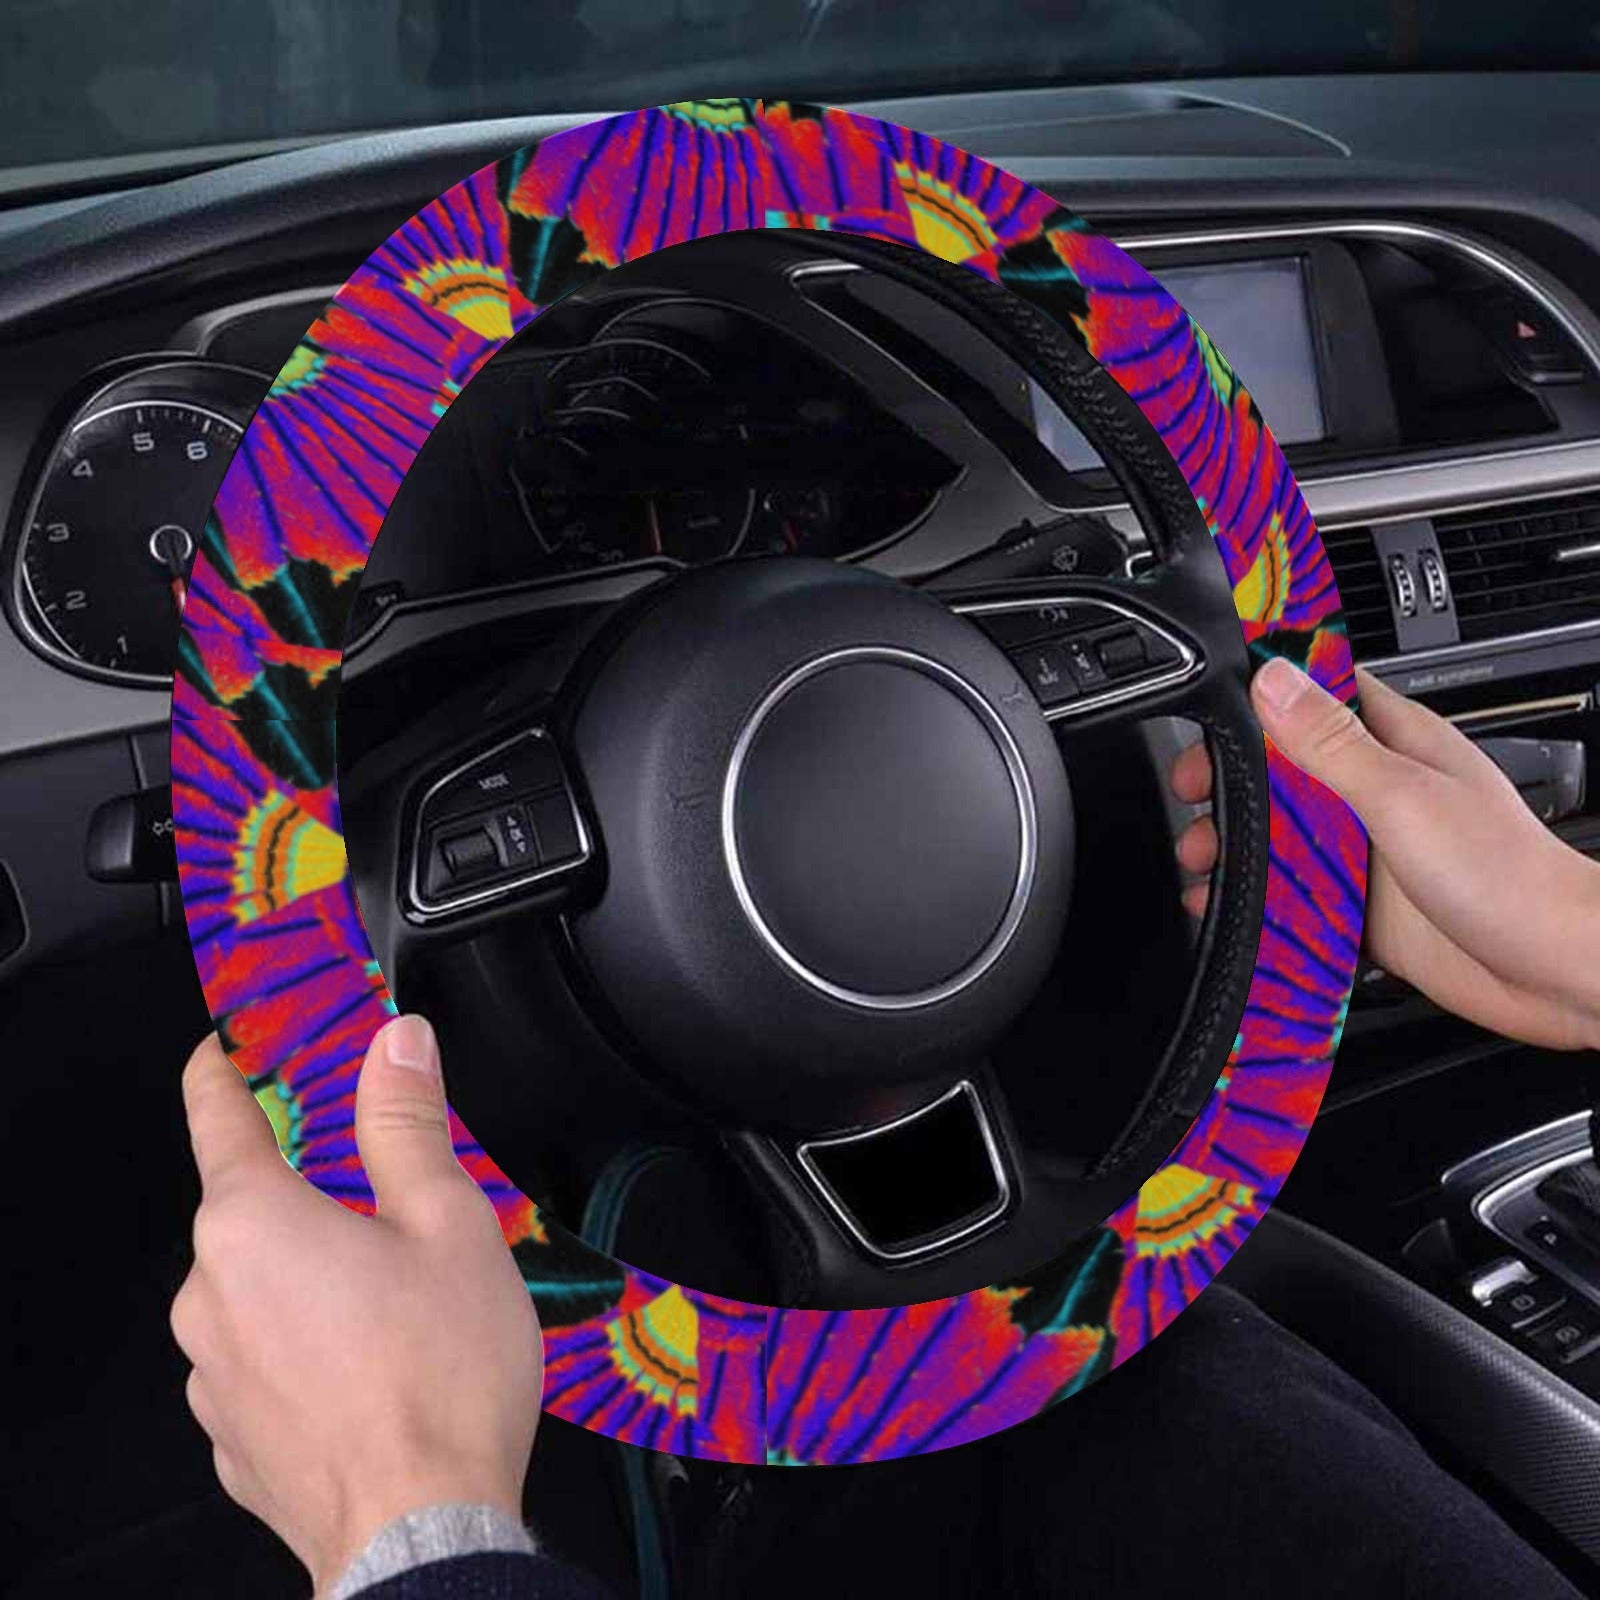 Eagle Feather Remix Steering Wheel Cover with Elastic Edge